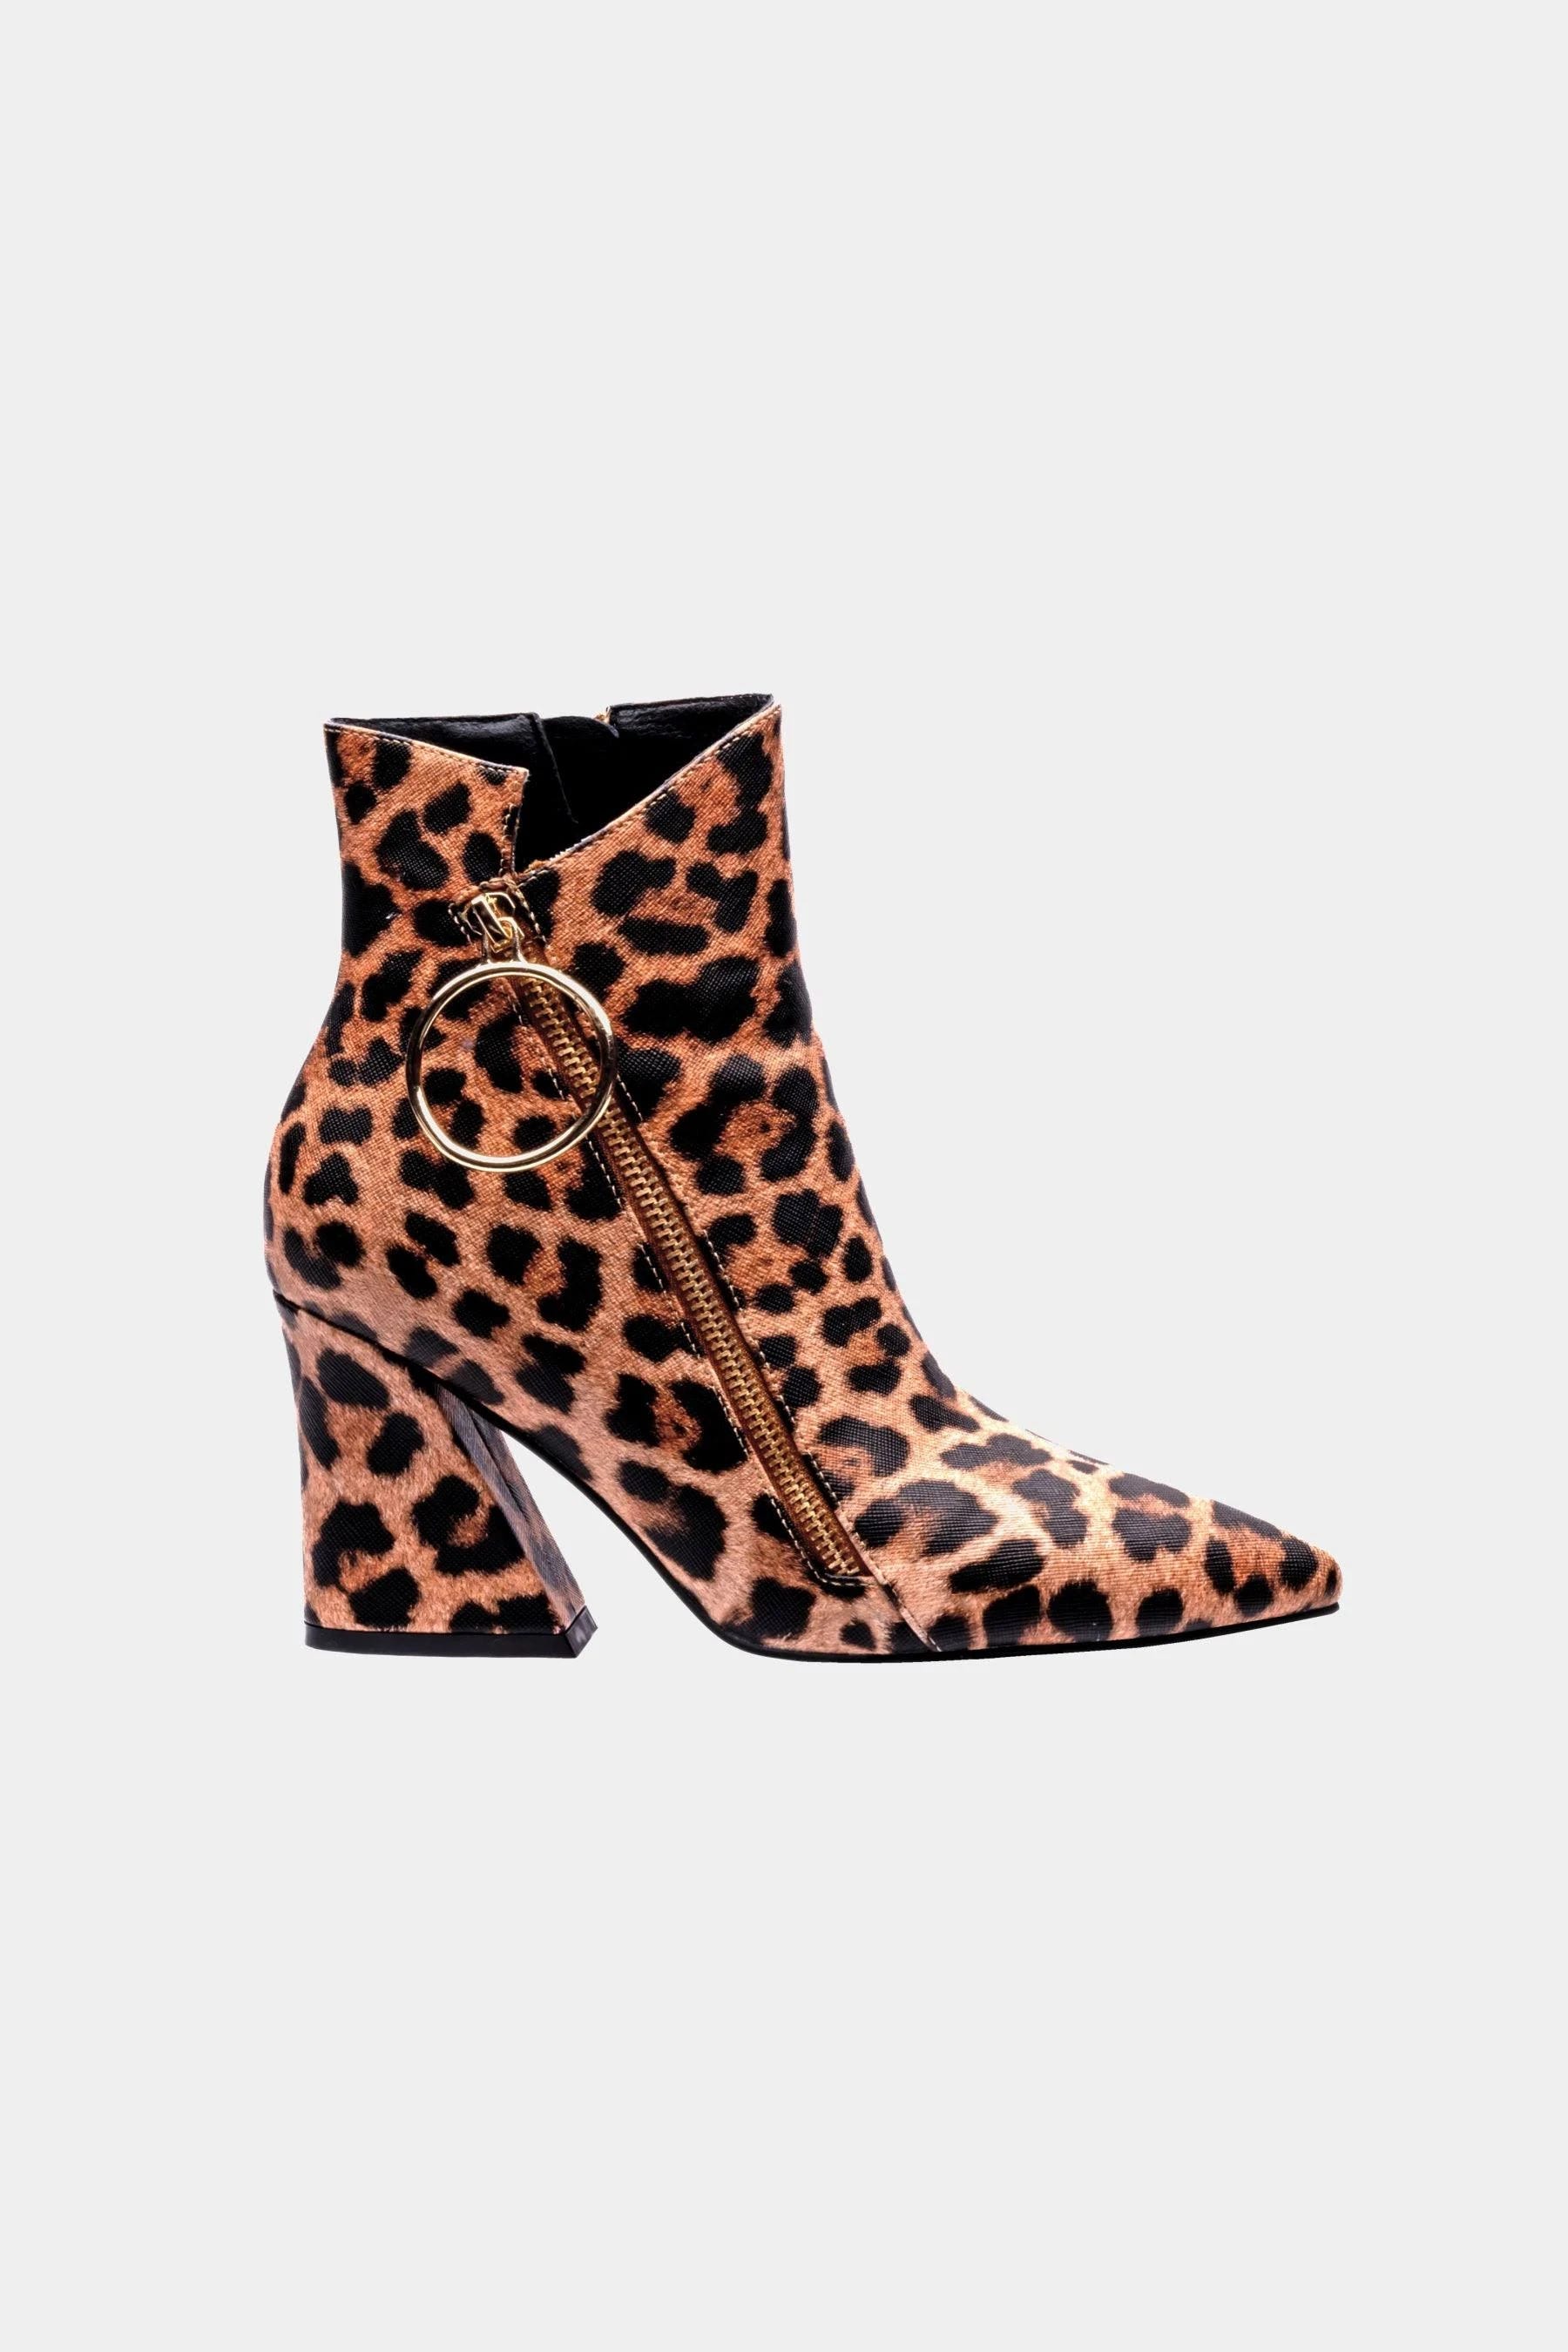 Fashionable Leopard Print Ankle Booties | Image